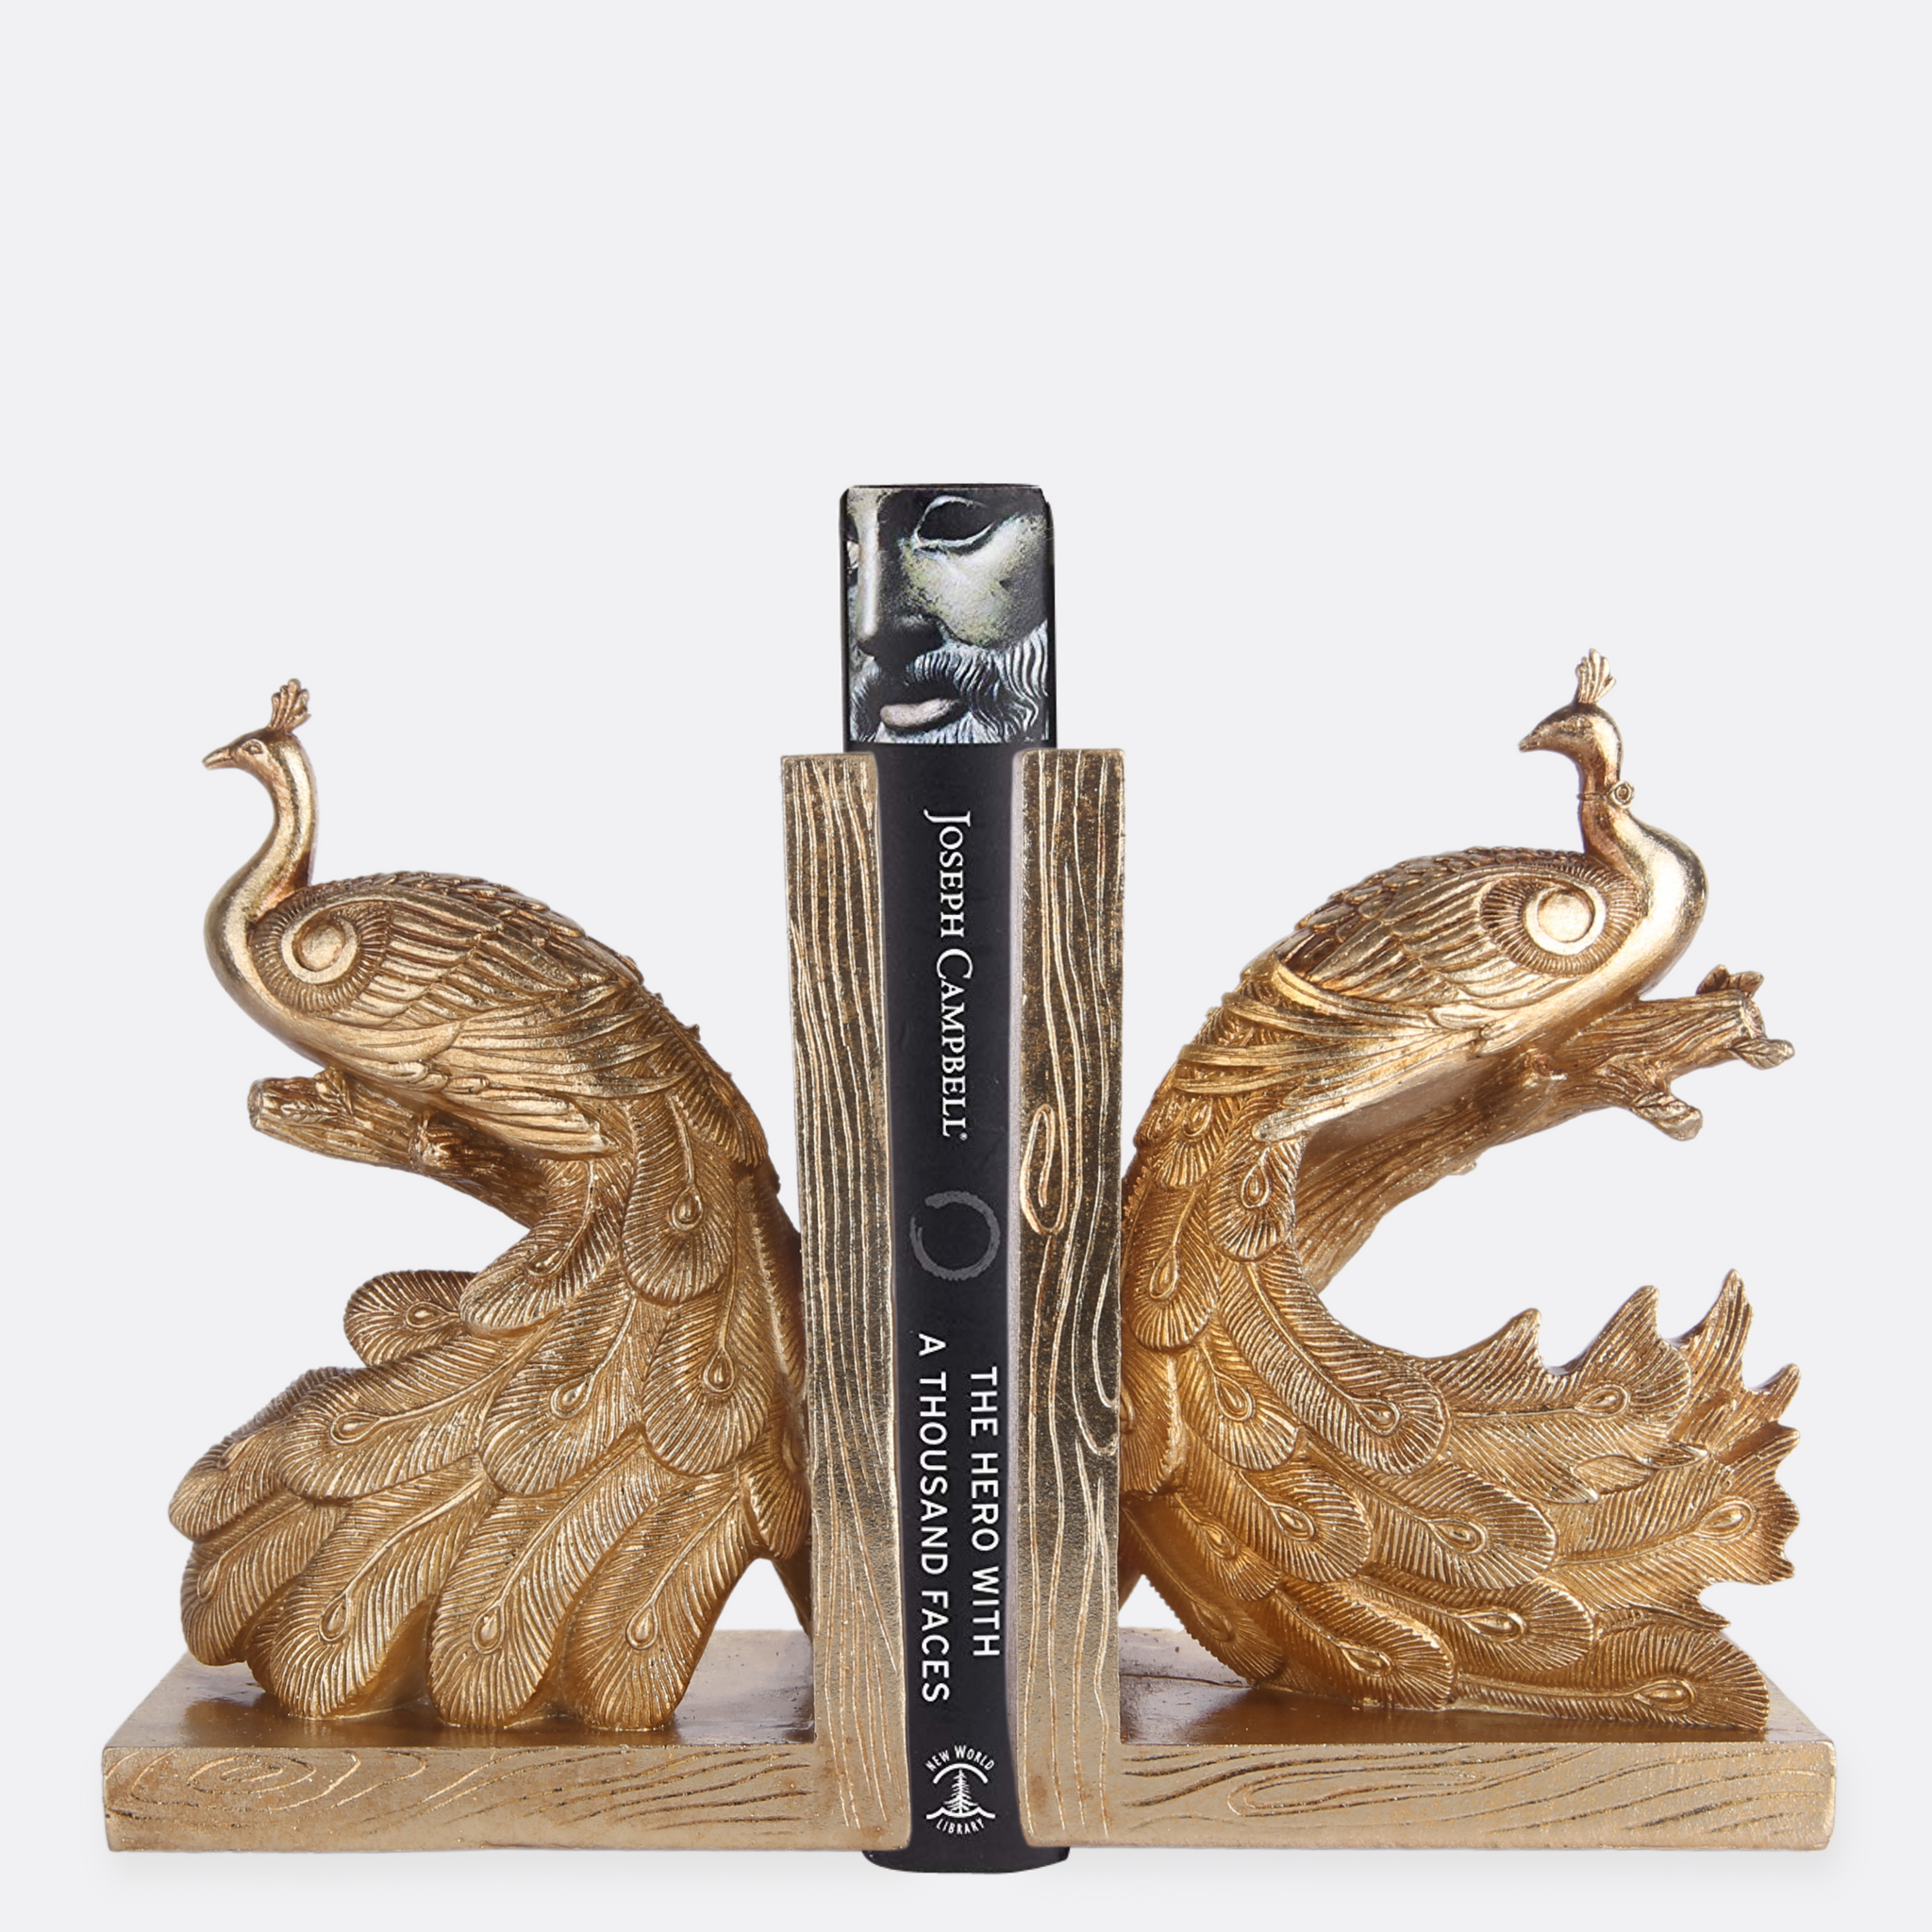 Peacock Bookends